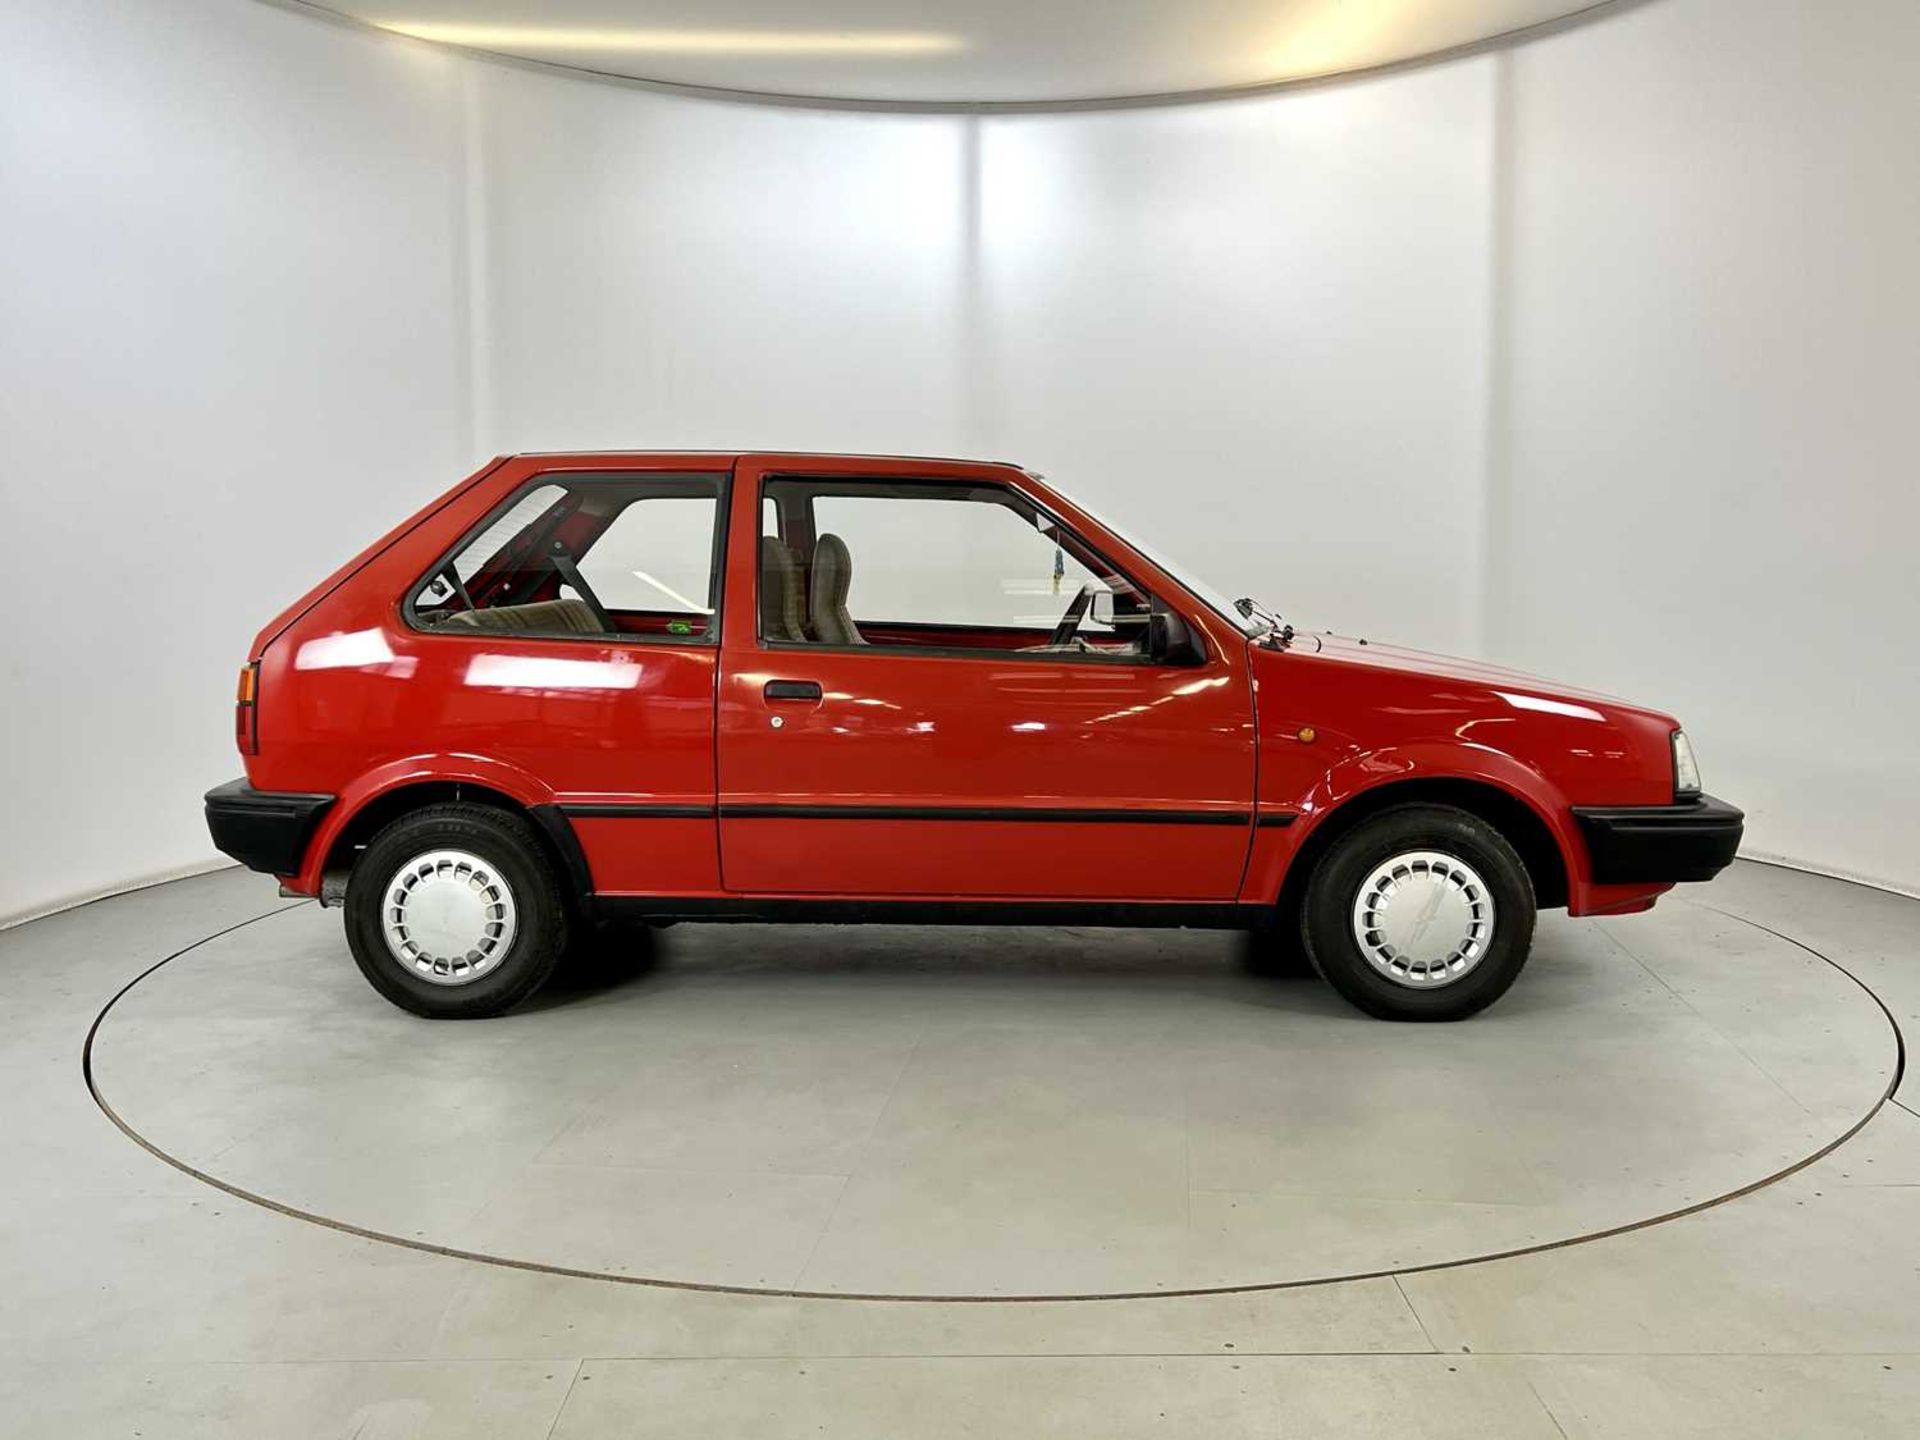 1987 Nissan Micra - Image 11 of 29